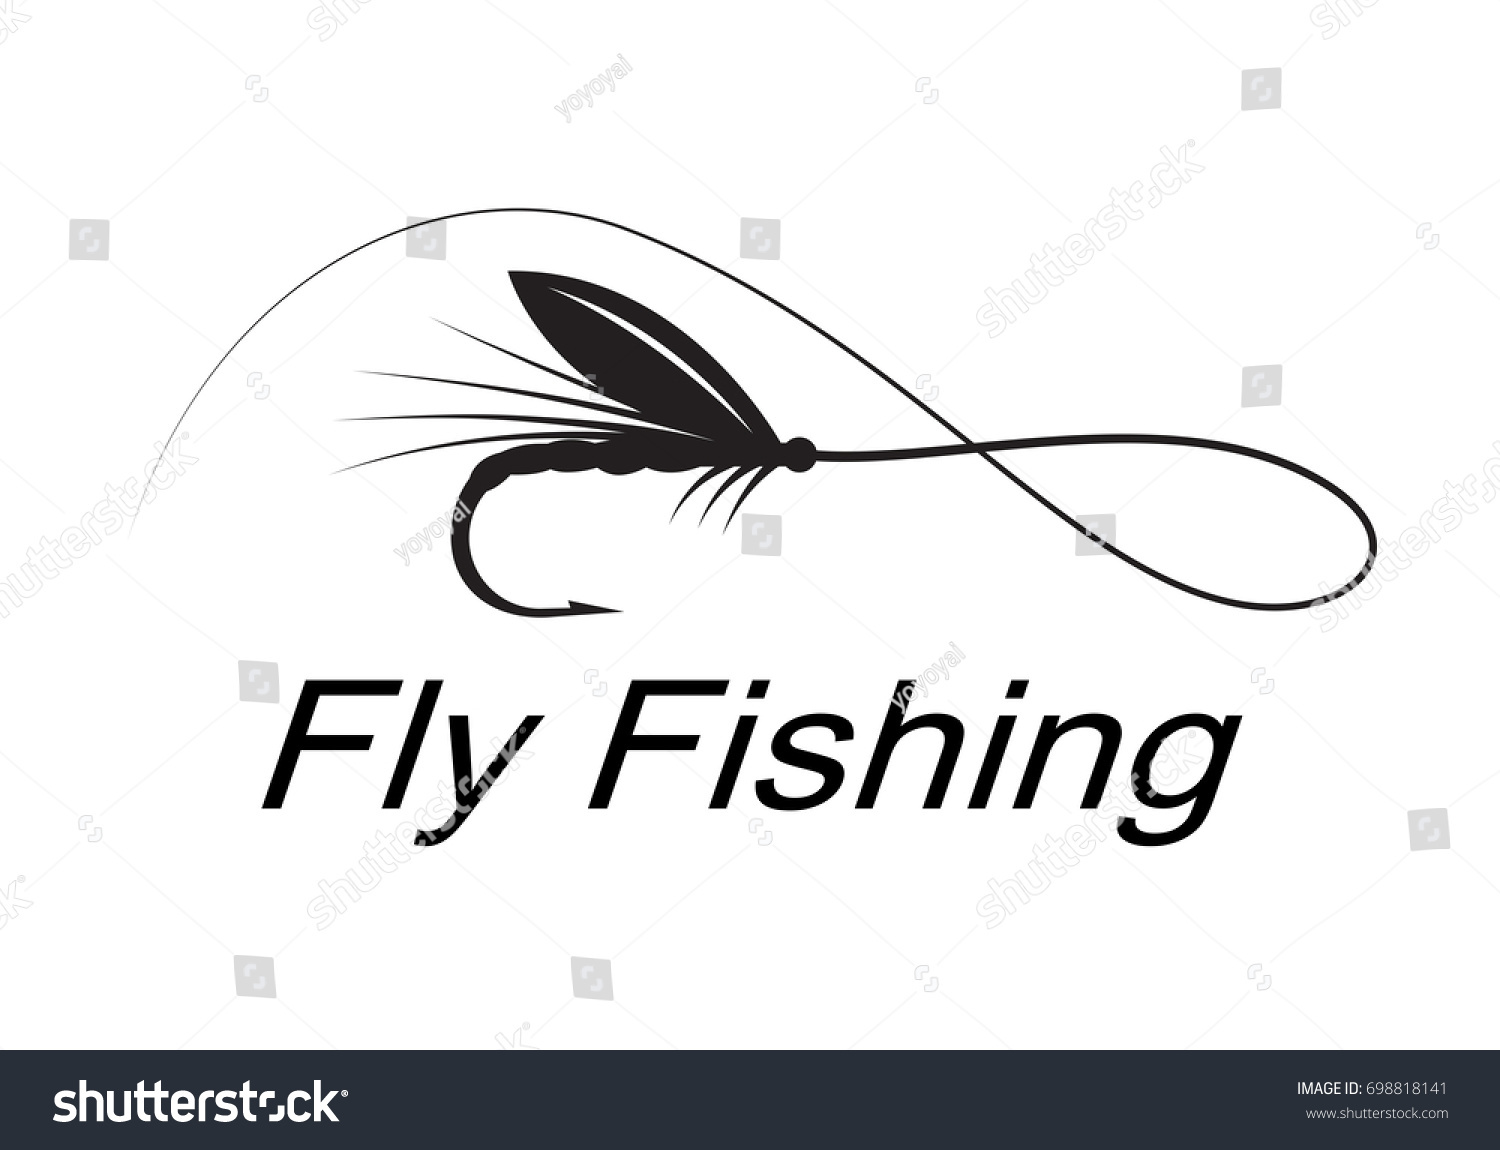 Graphic Fly Fishing Vector Stock Vector 698818141 ...